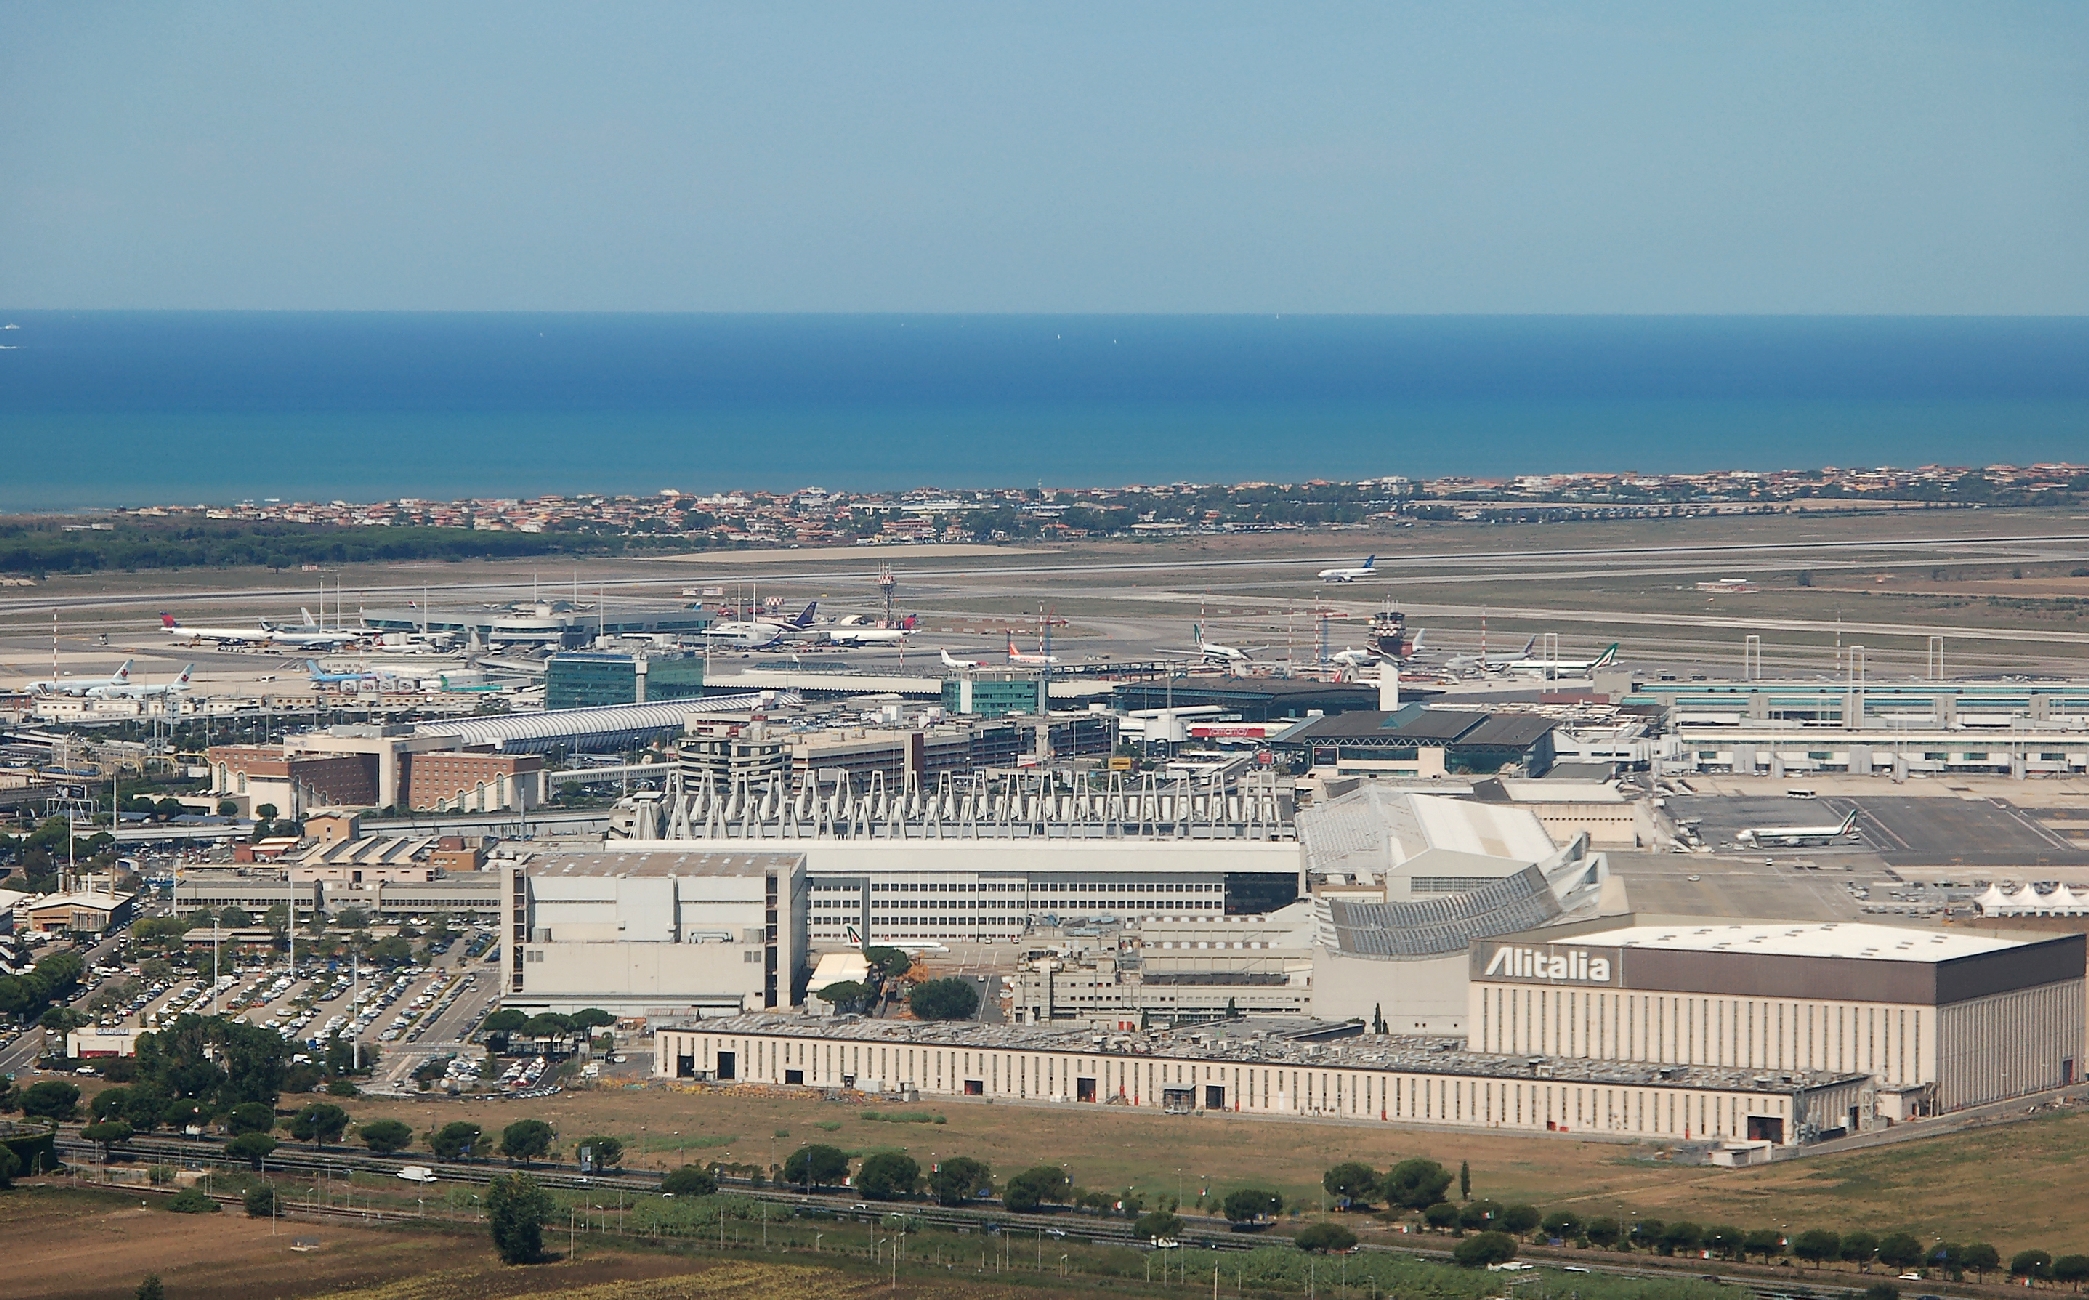 An aerial view of Fiumicino airport Rome